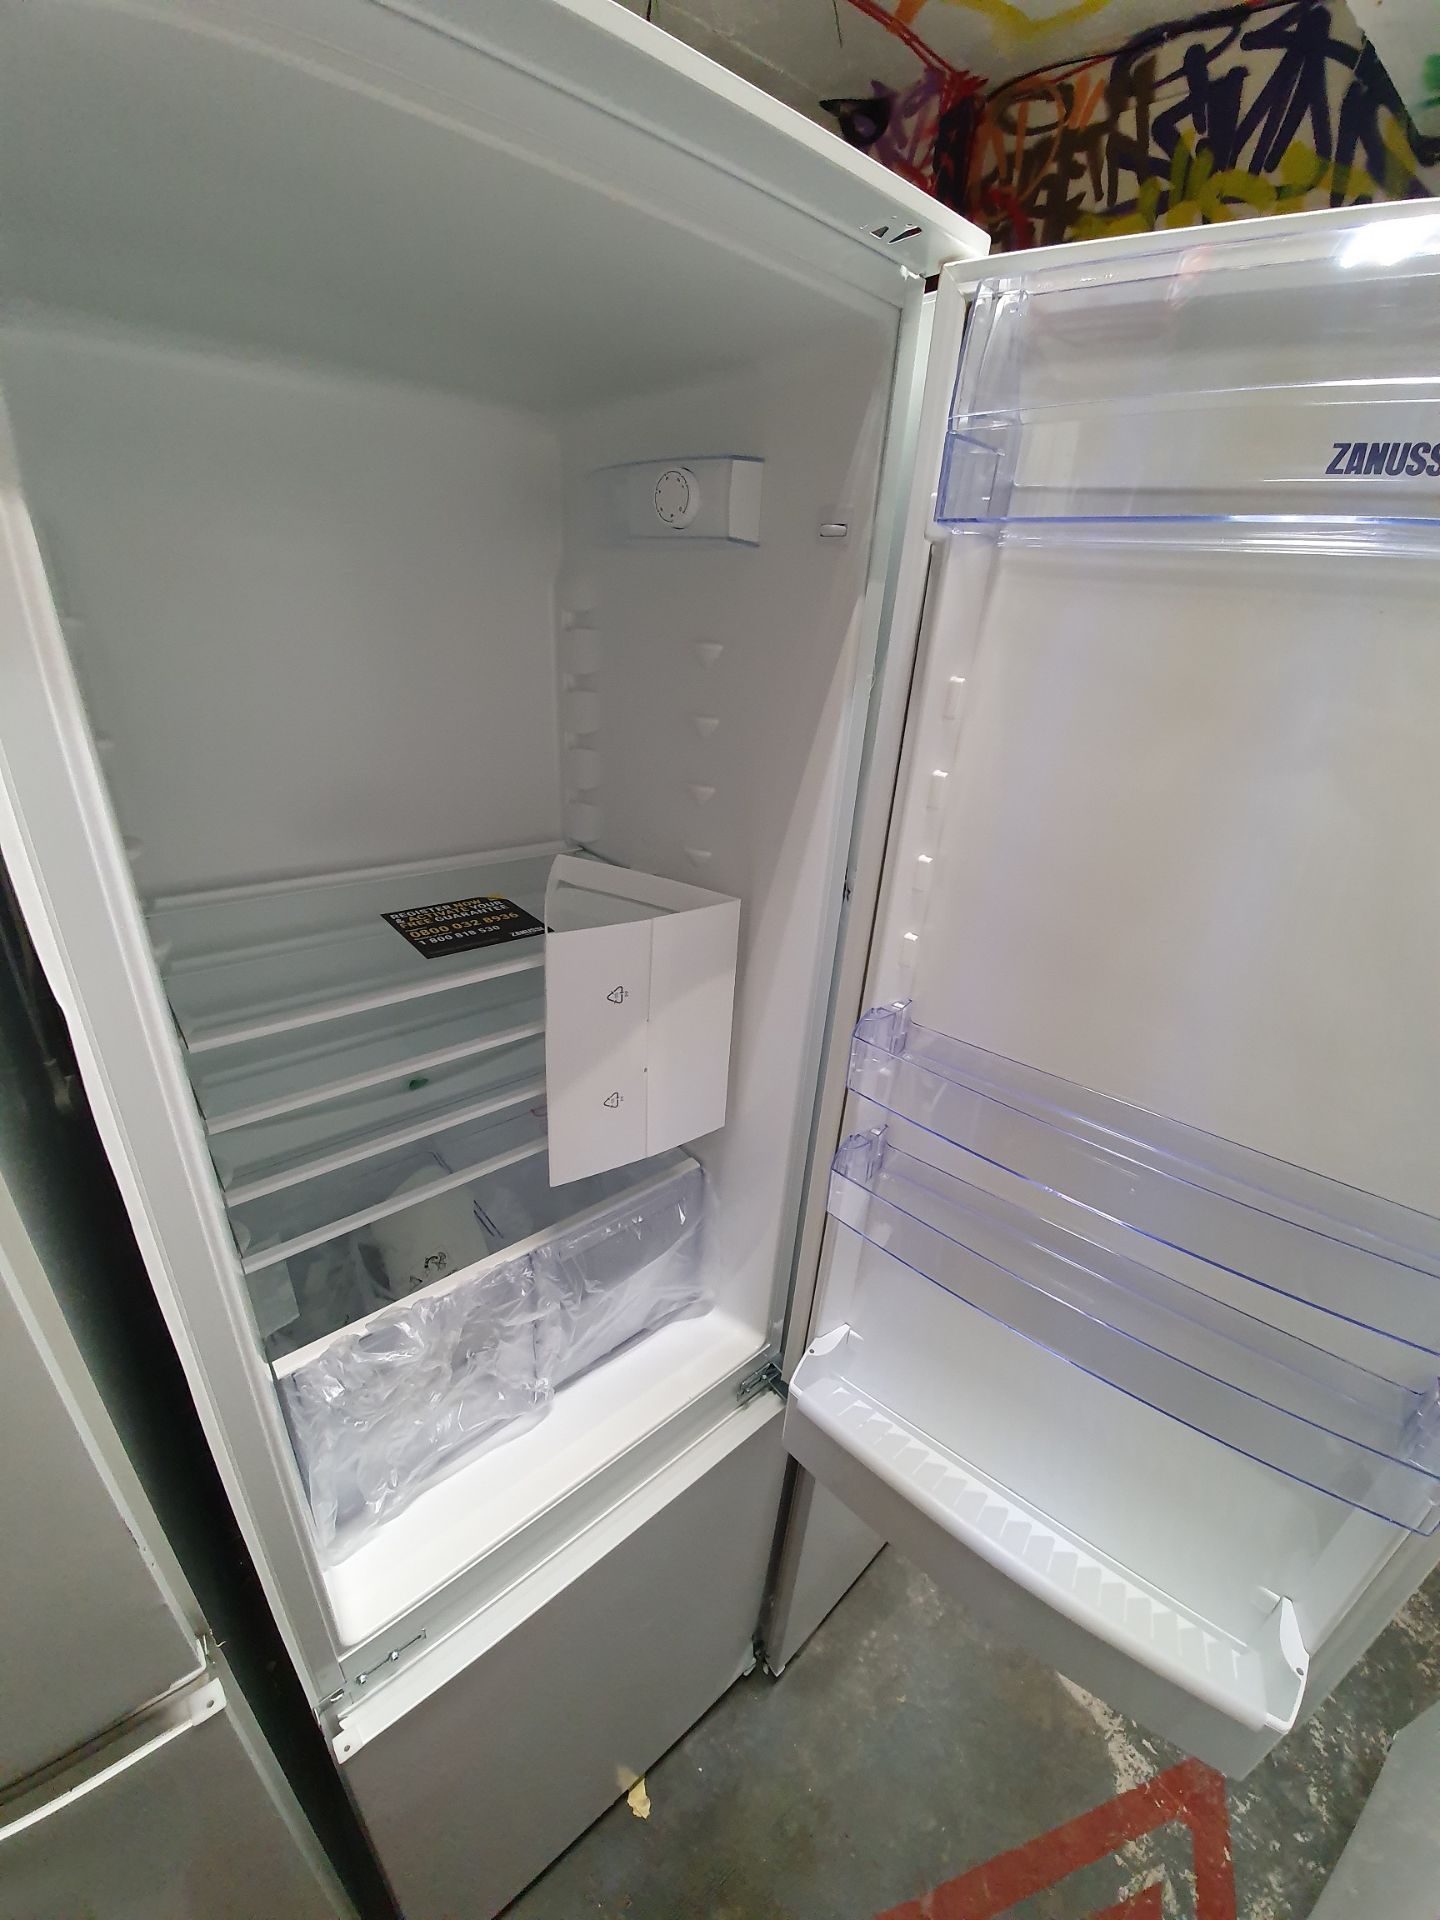 NEW/GRADED AND UNPACKAGED Prima Plus PRRF700 Built In Frost Free Fridge Freezer (Brand new slight - Image 9 of 14